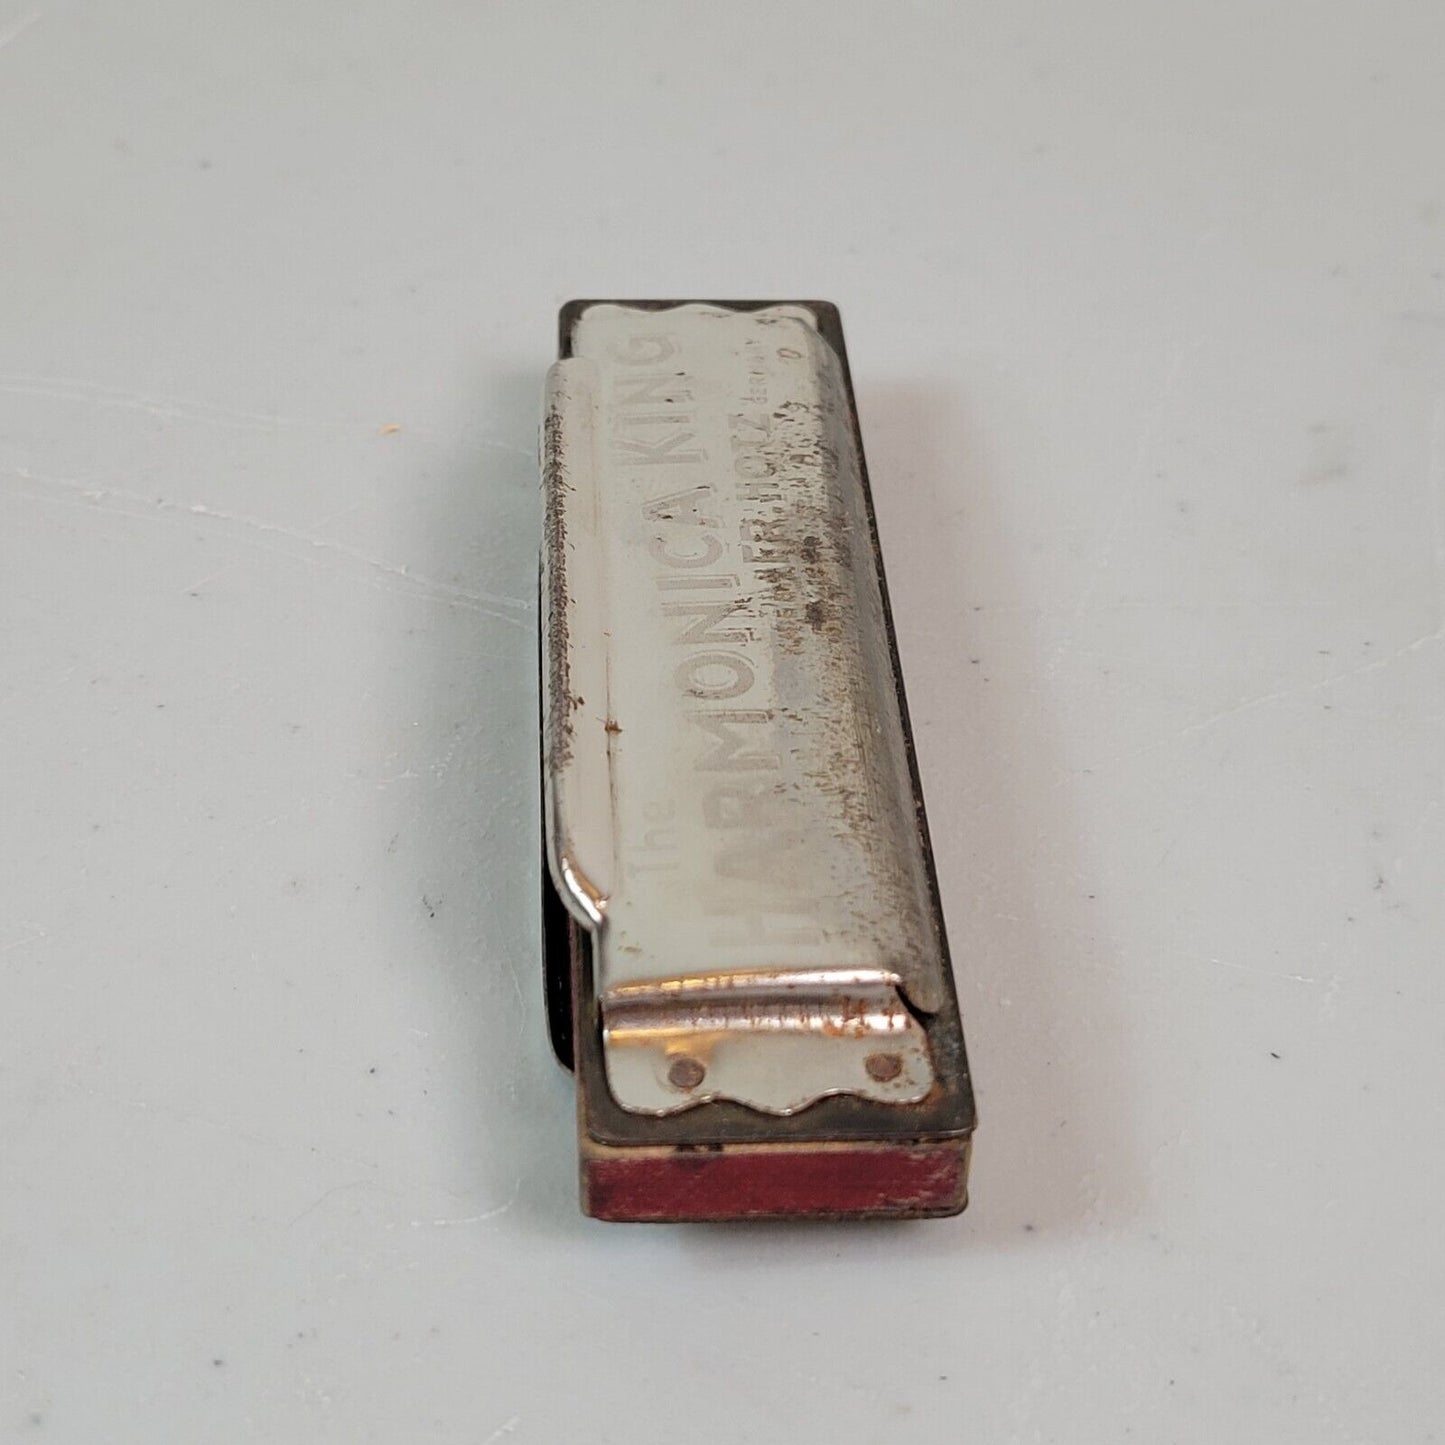 The Harmonica King by FR. Hotz Made in Germany w/ Tin Case